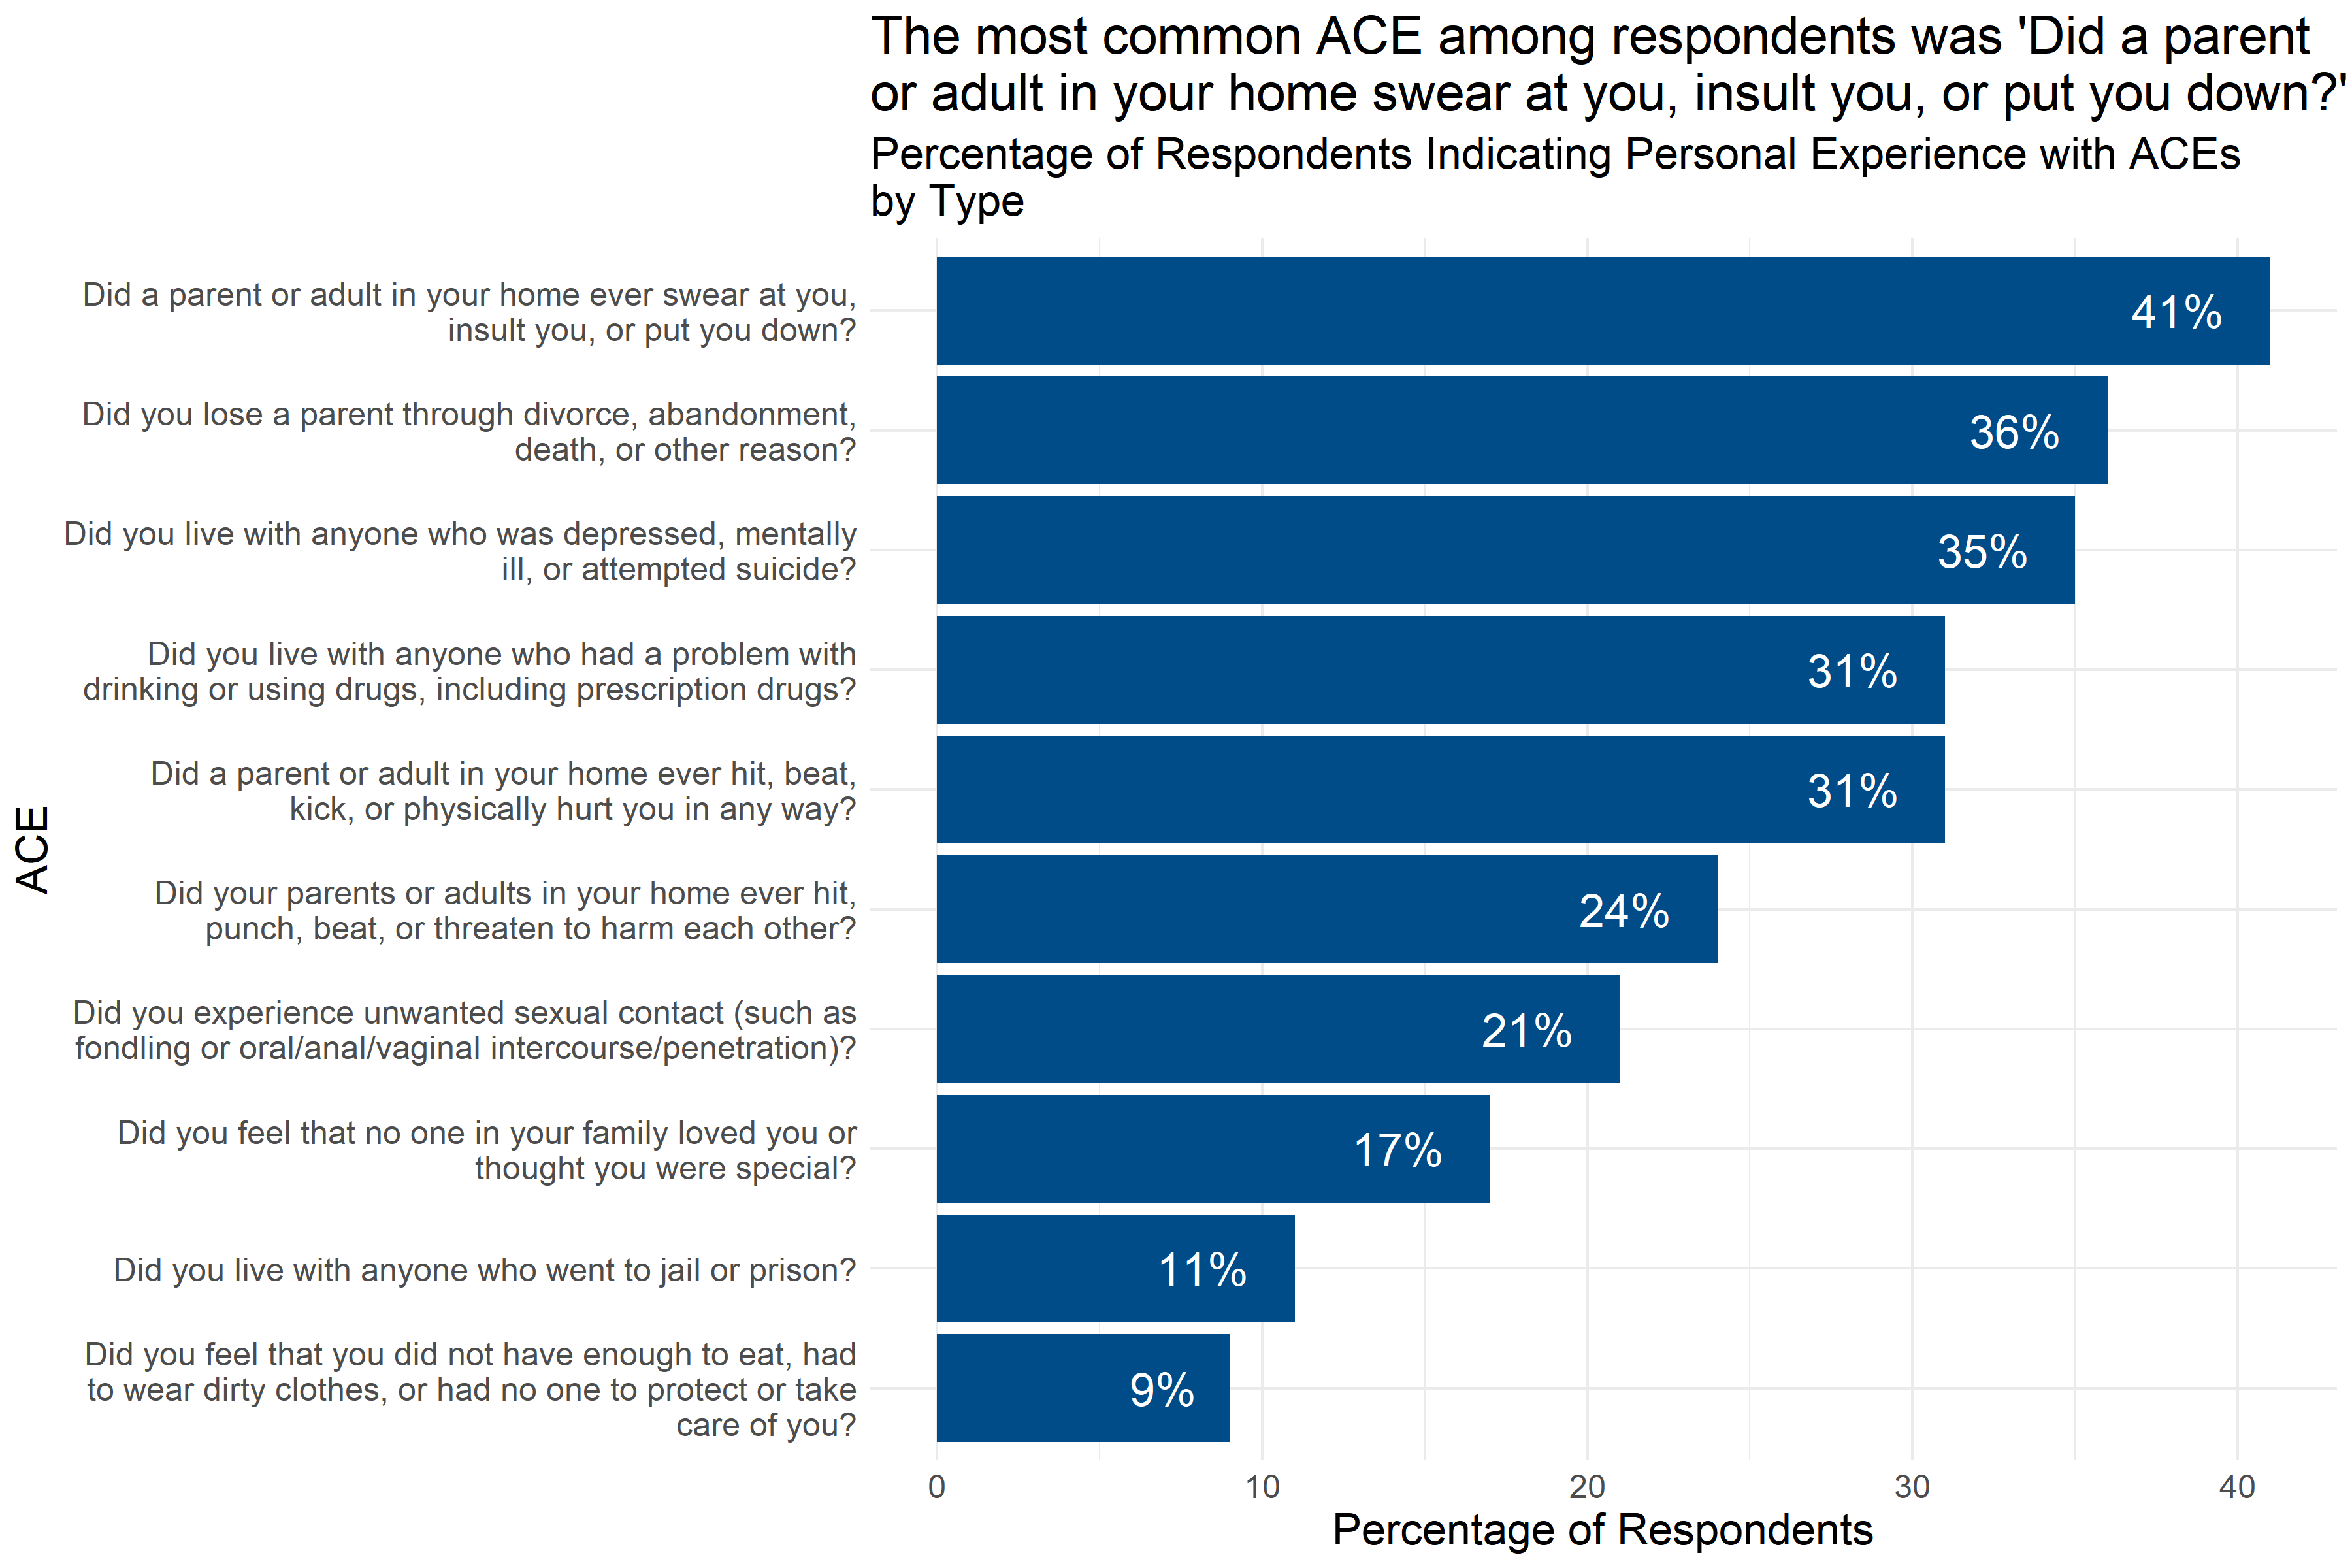 Percentage of respondents indicating personal experiences with ACEs by type of ACE